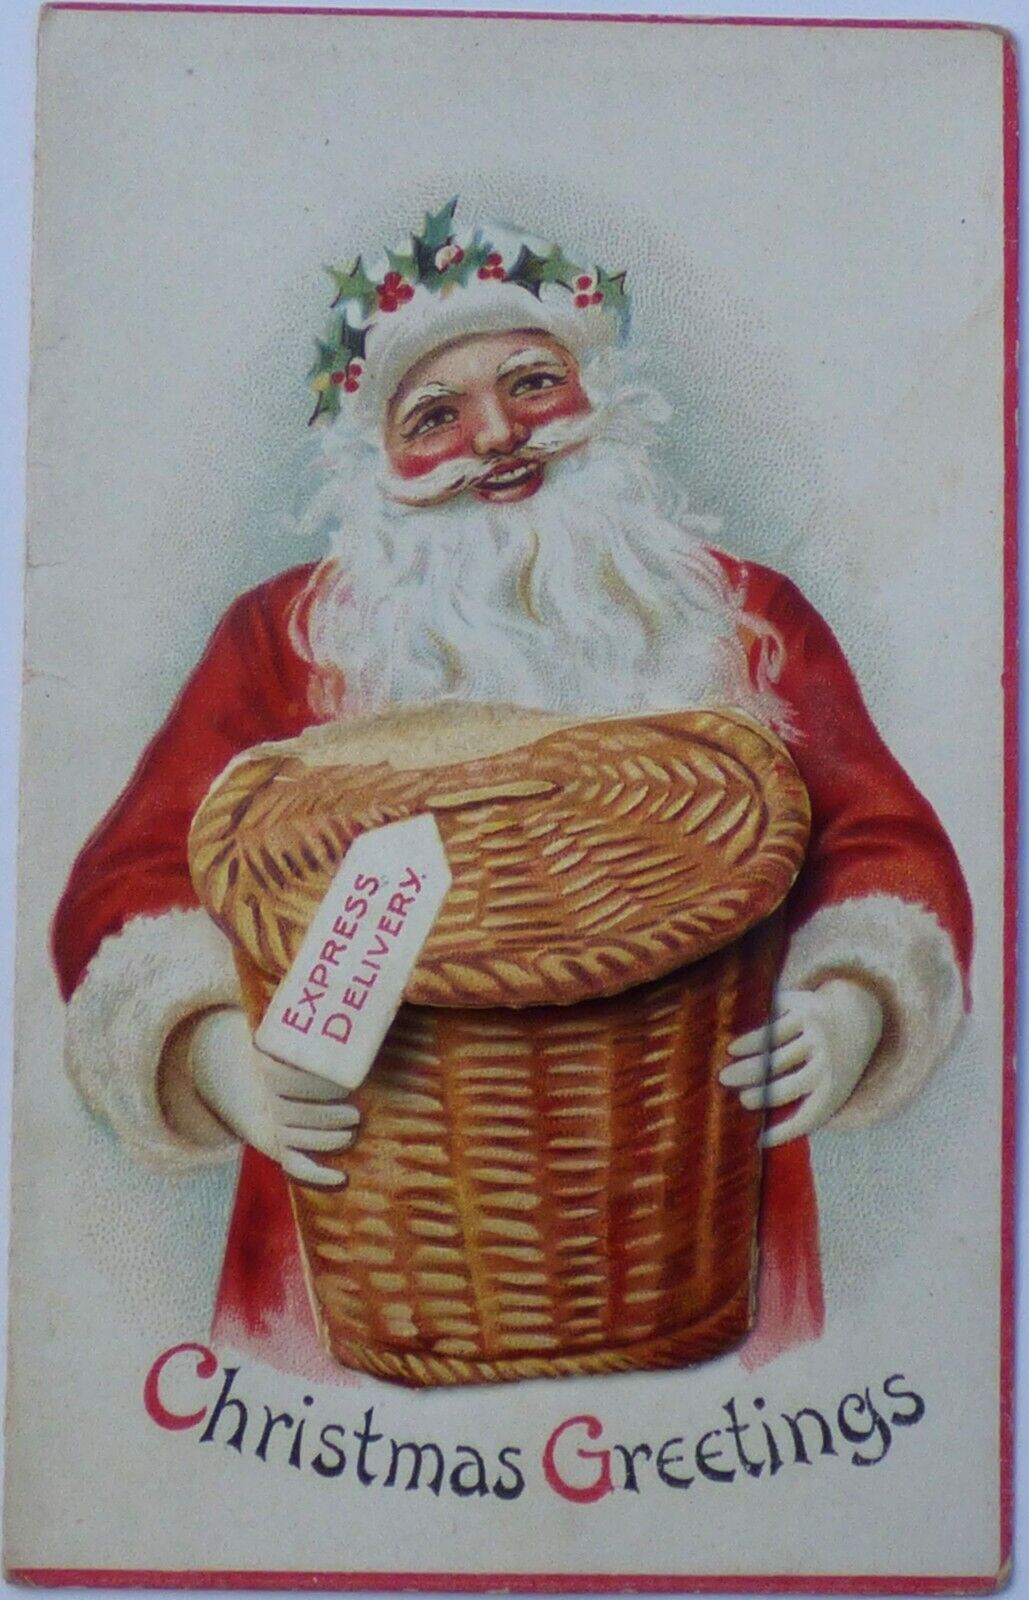 Marvellous Antique Christmas Card by Raphael Tucks and Sons